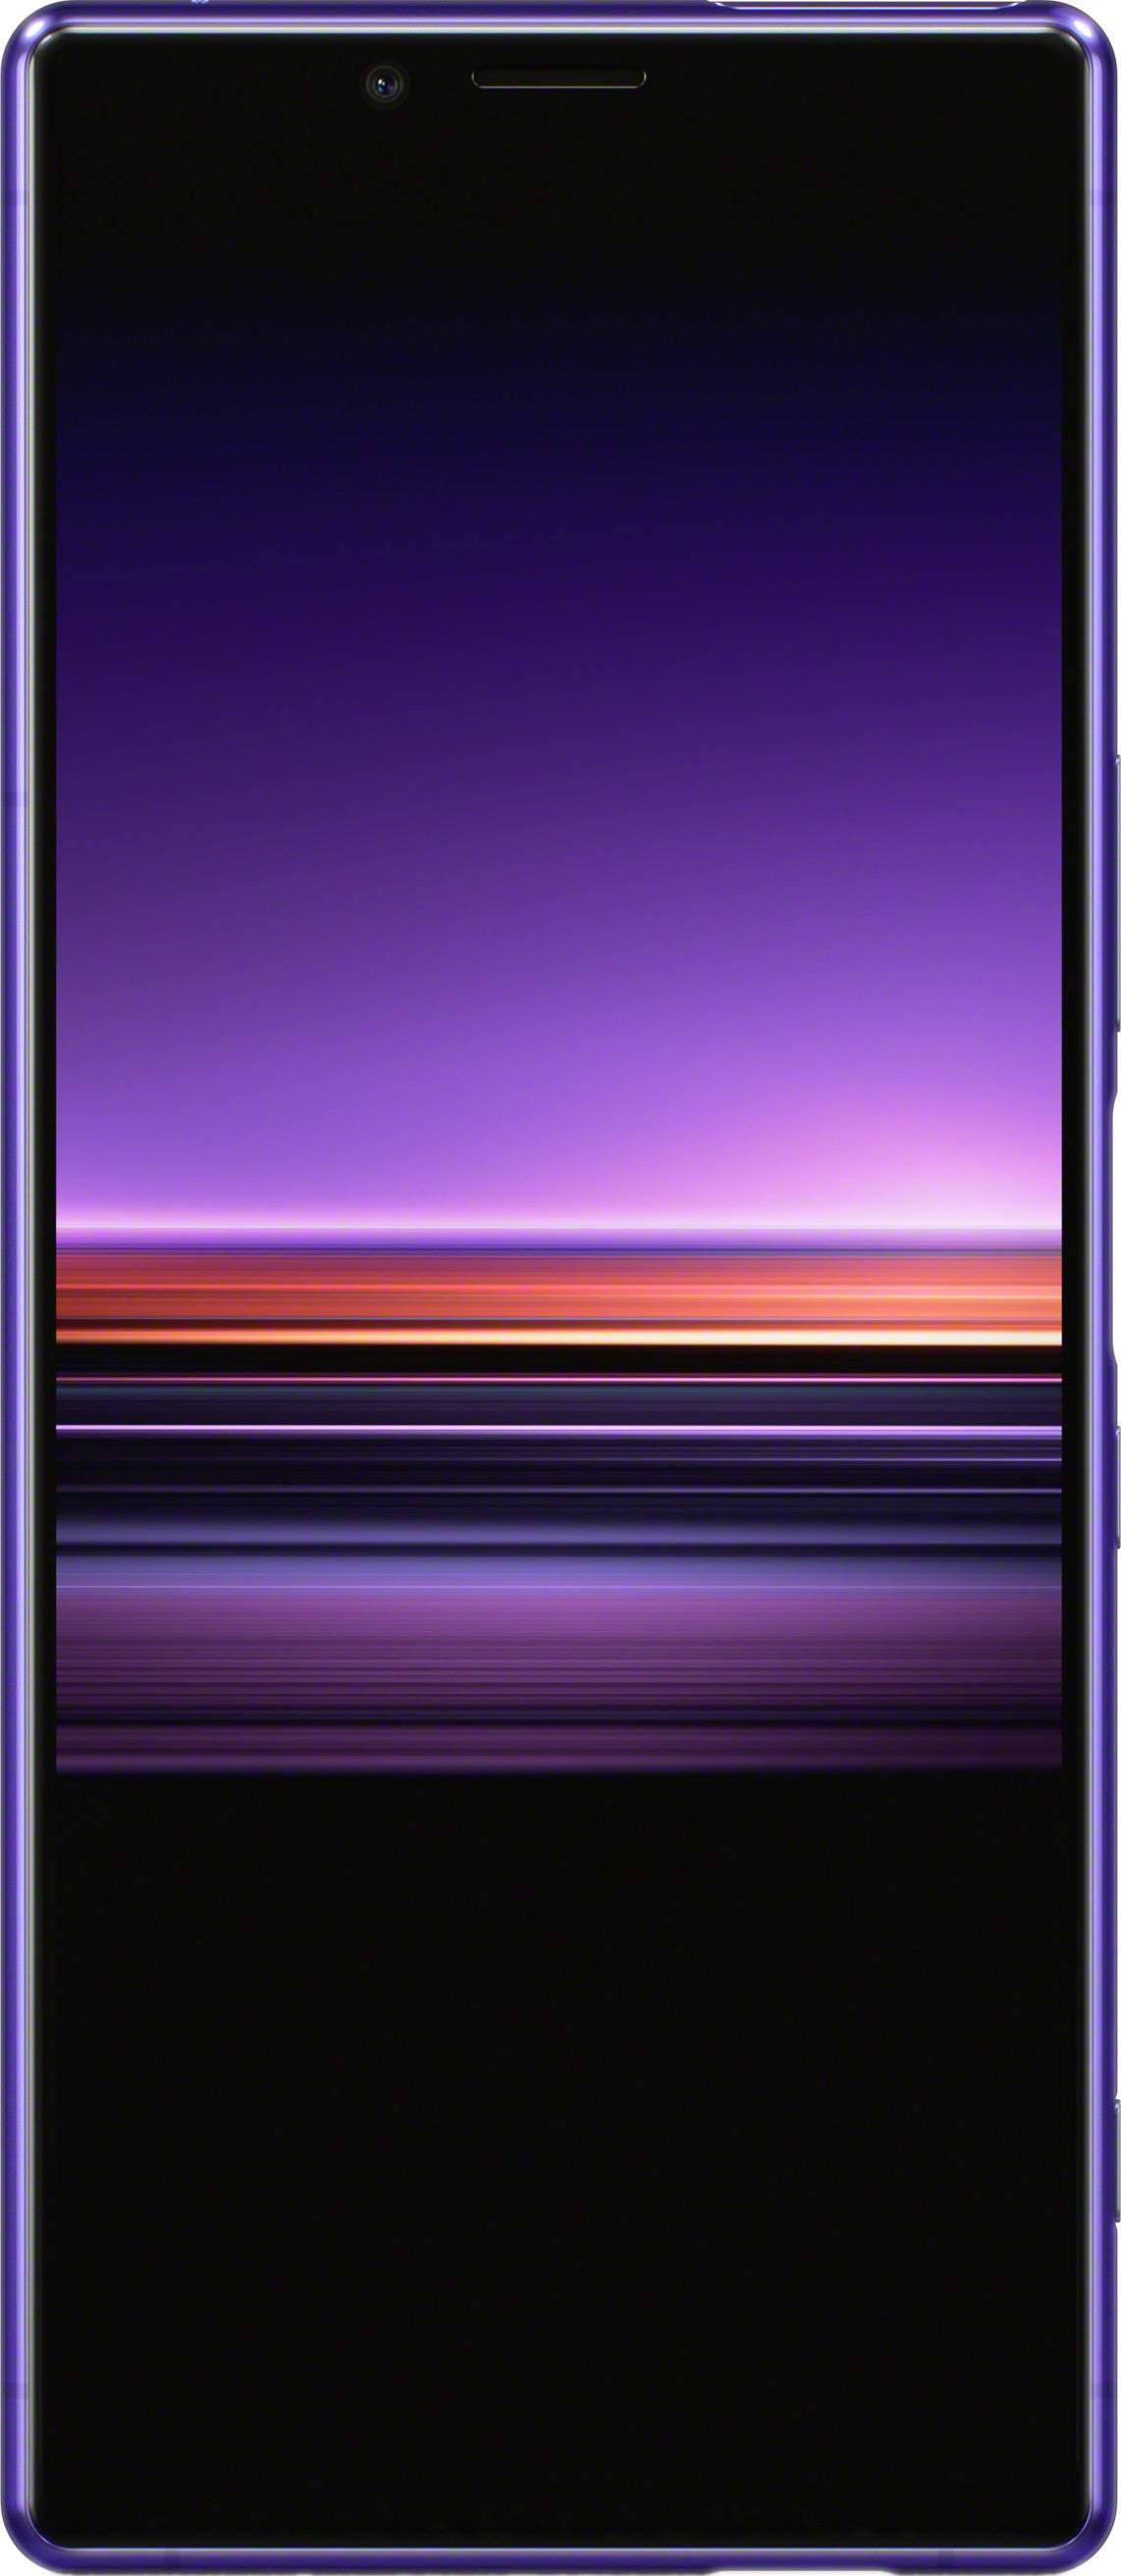 Sony announces the Xperia 1: super-tall, 4K OLED display, cinematic camera features